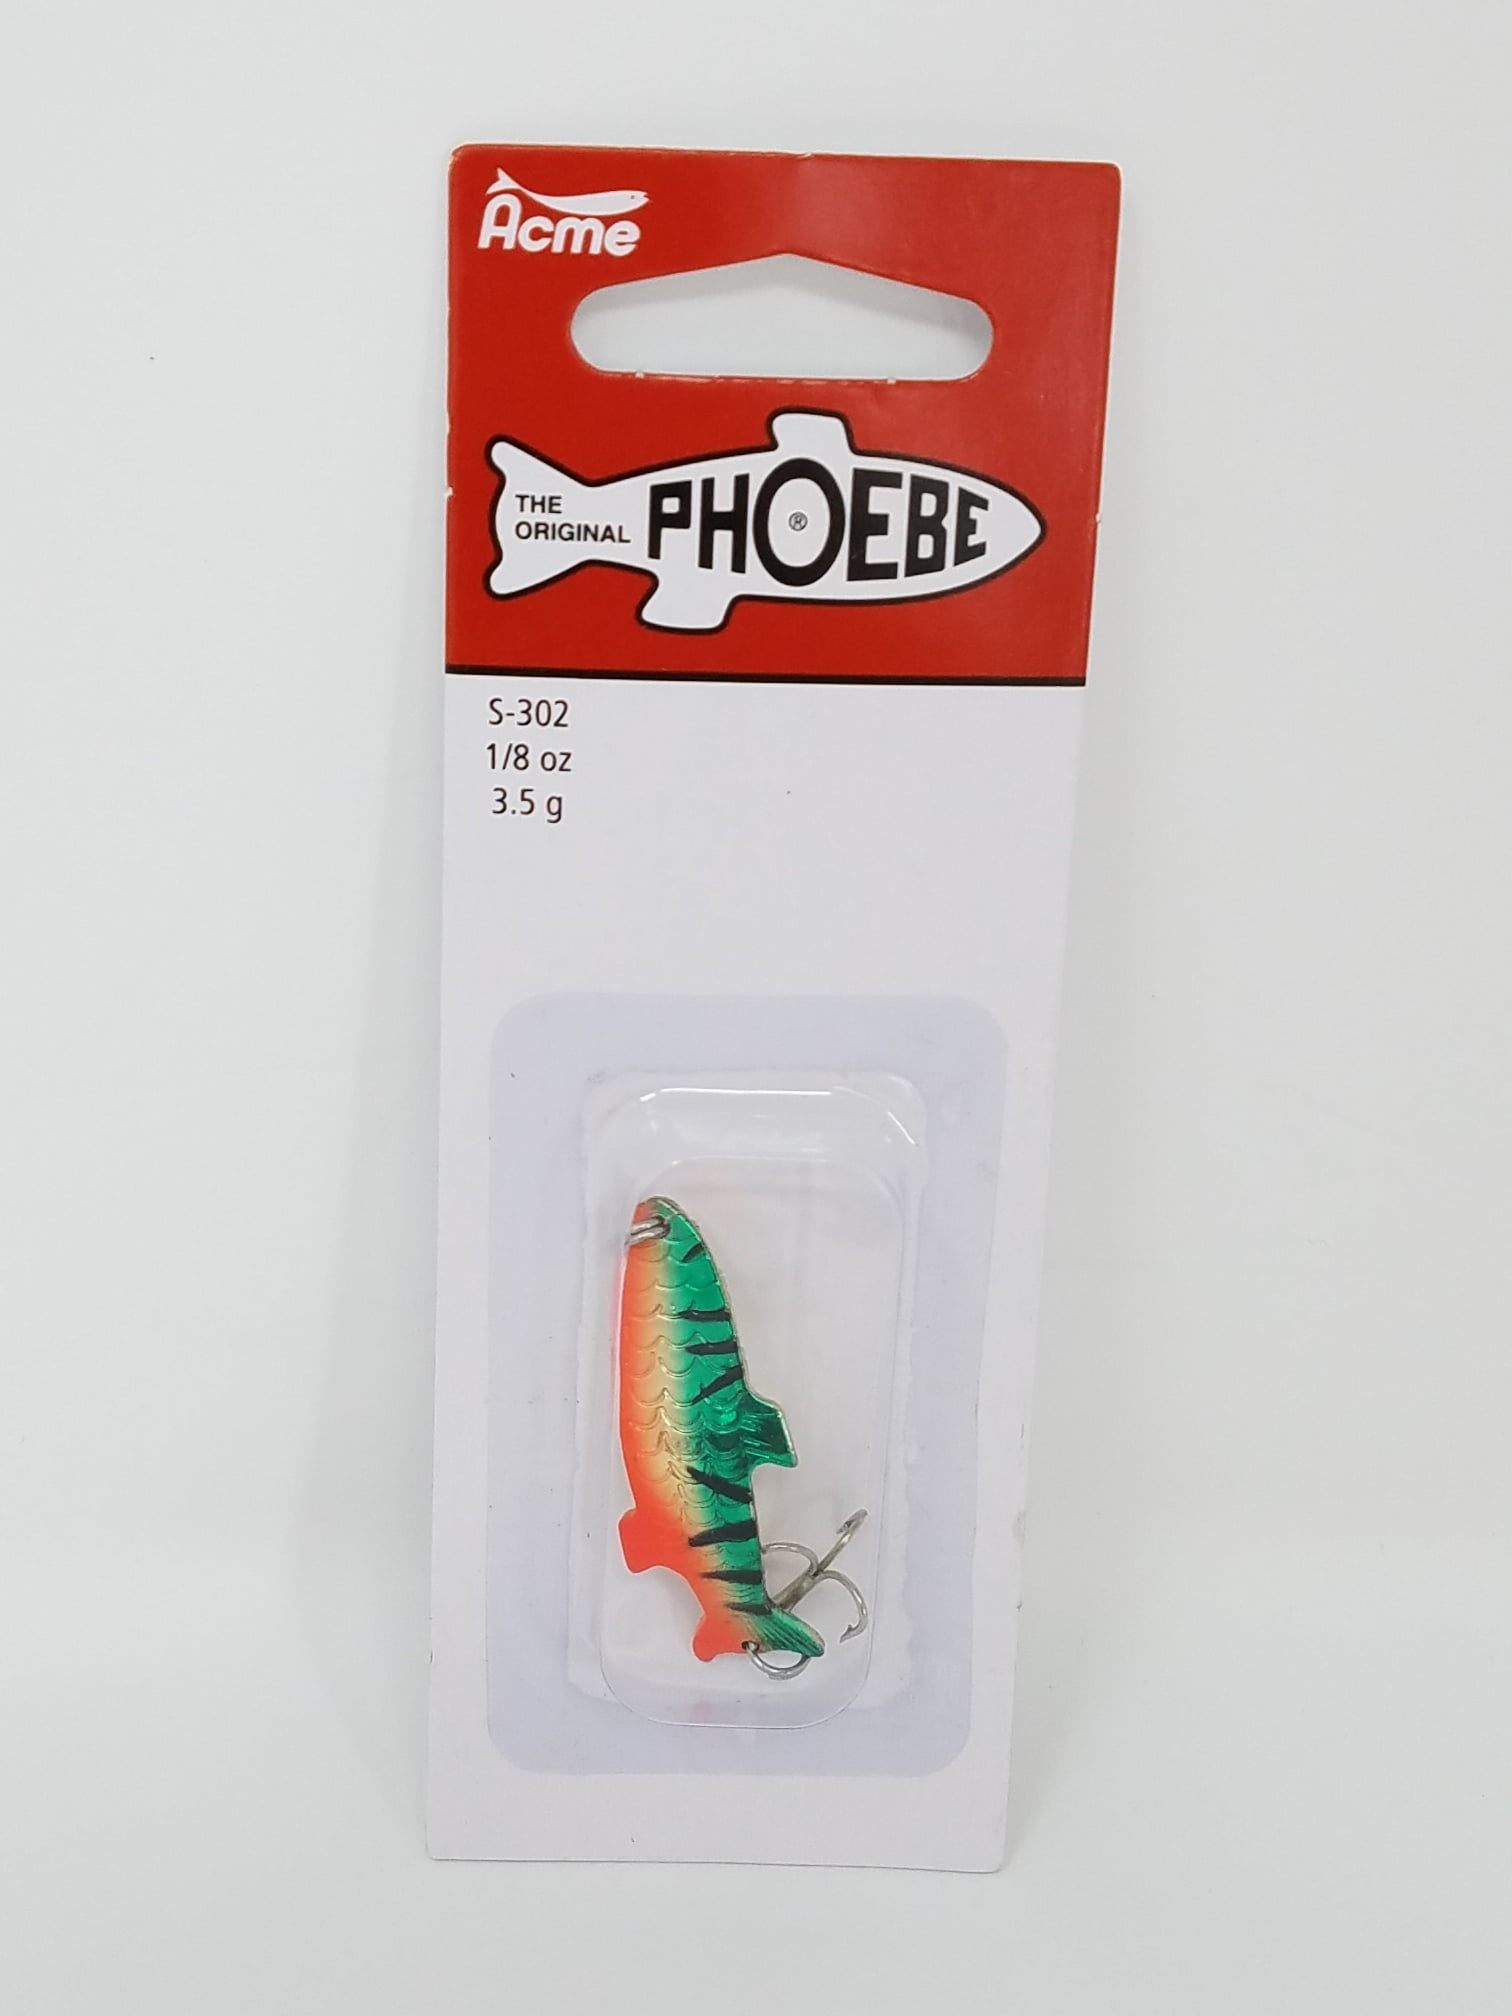 Acme Tackle Phoebe Fishing Lure Spoon Hammered Gold Perch 1/8 oz